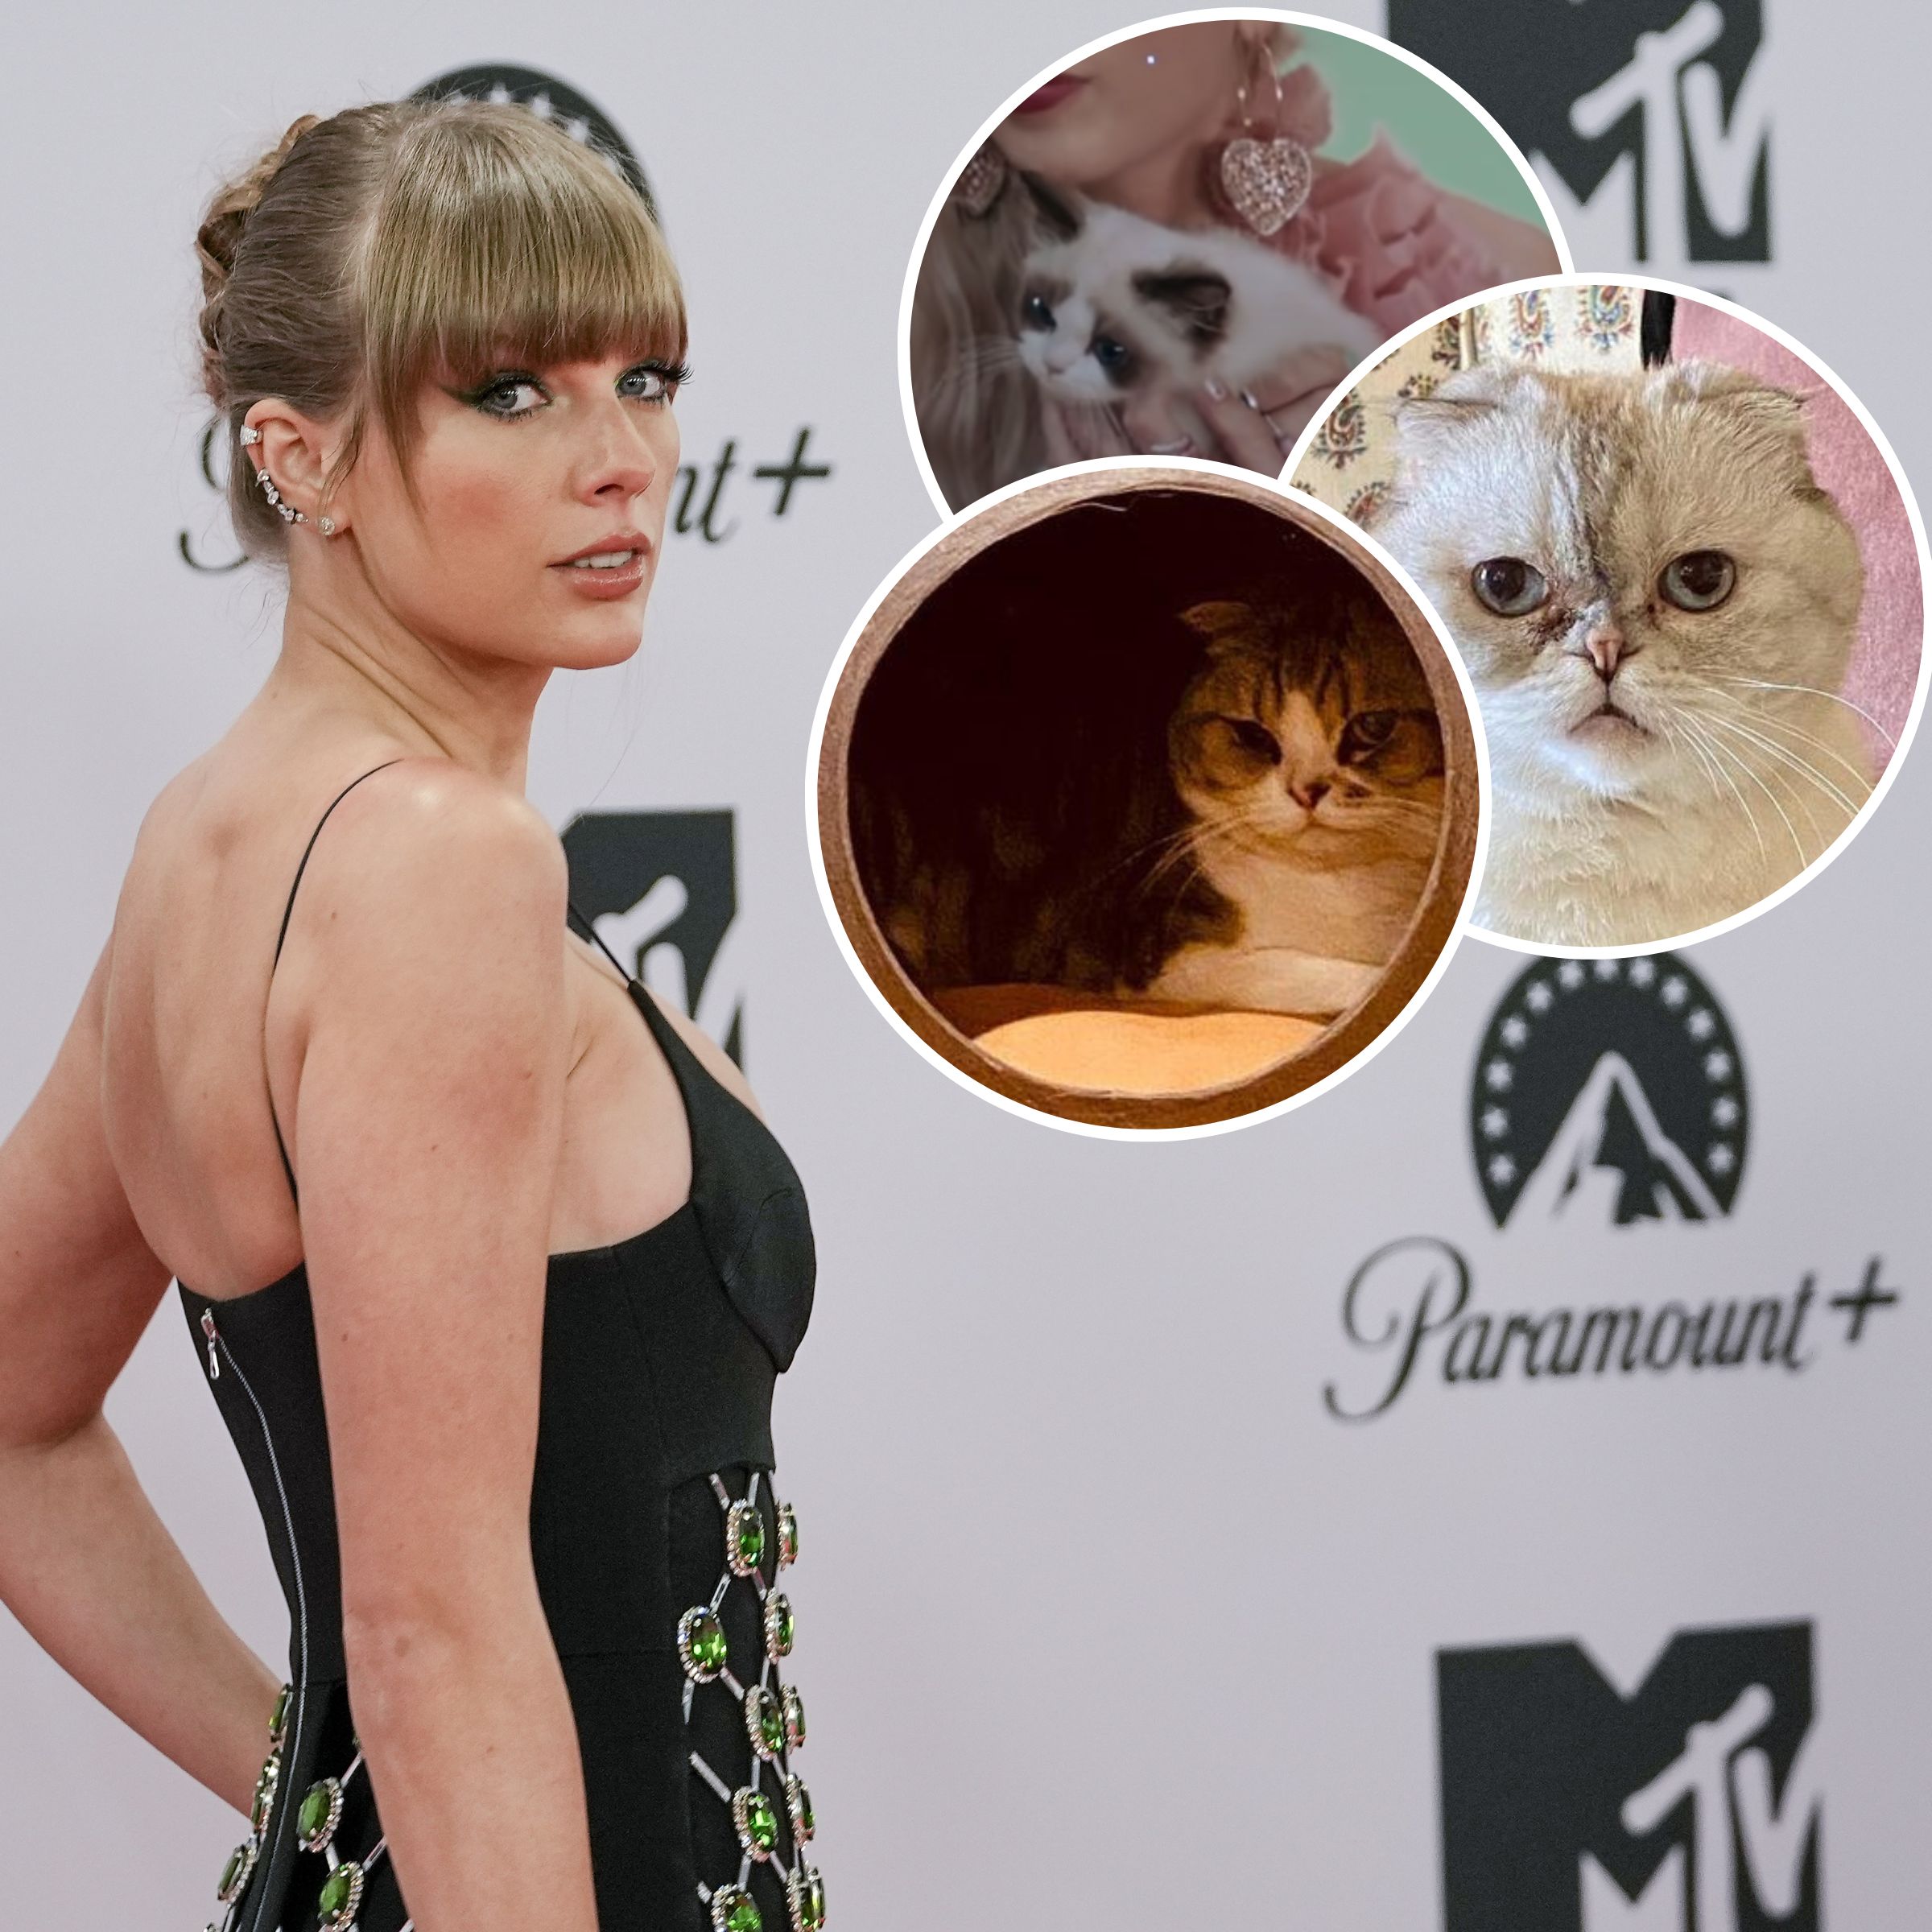 Taylor Swift Had an 'Amazing Time' Working on 'Cats